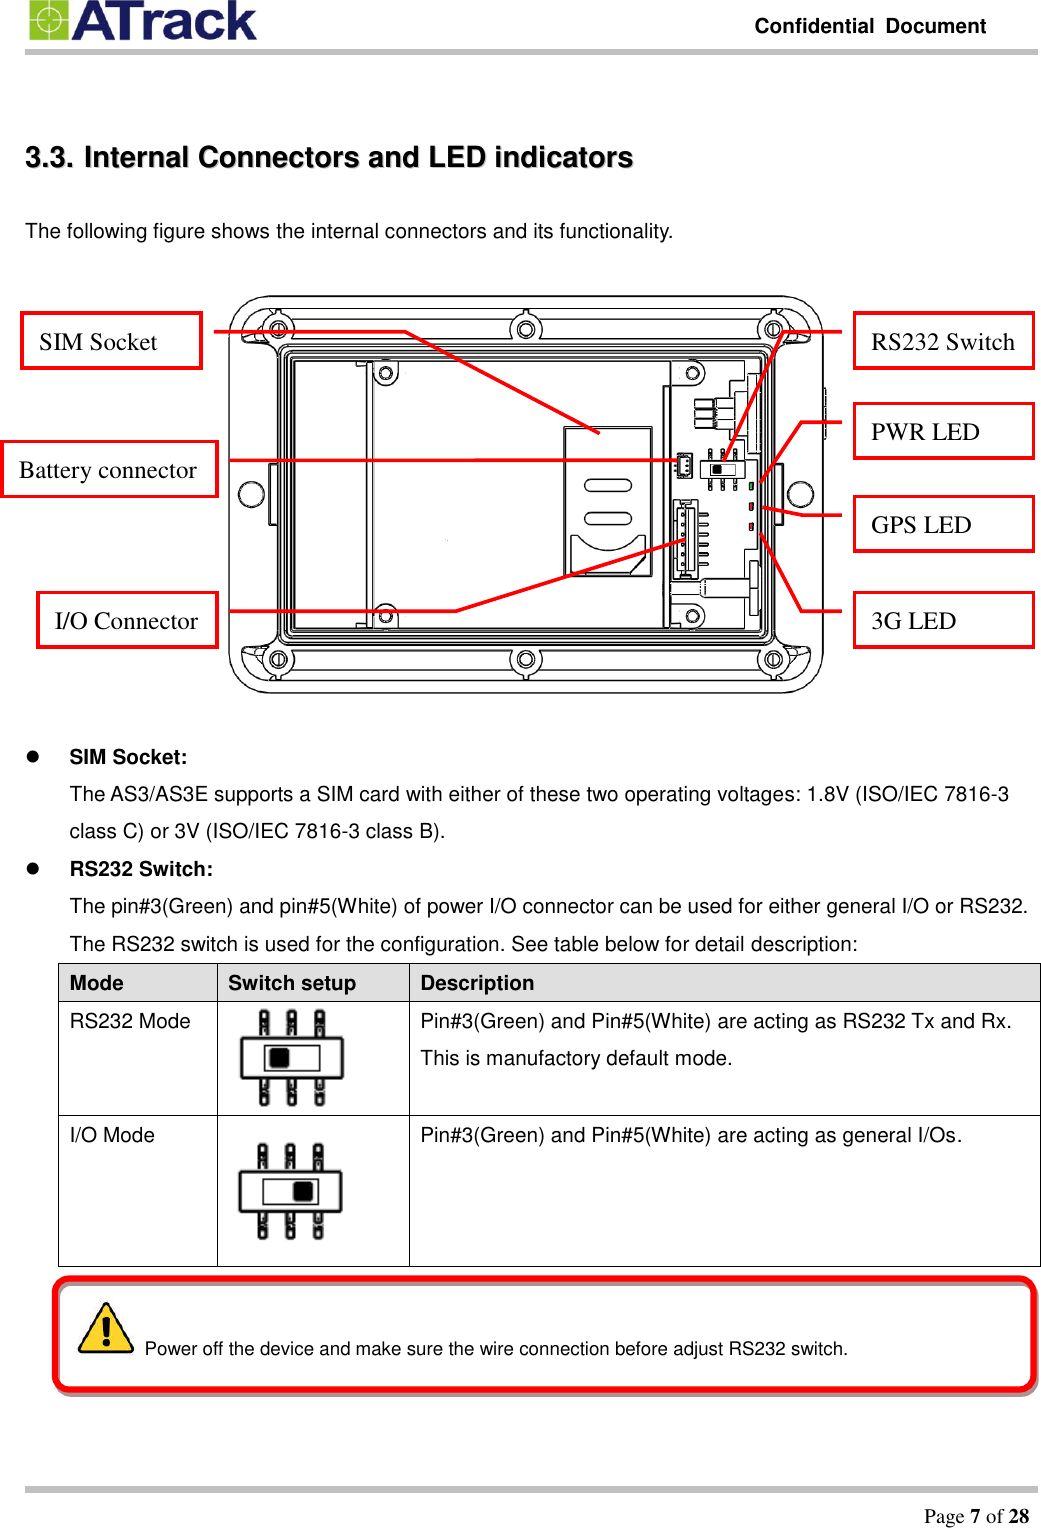         Confidential  Document   Page 7 of 28   33..33..  IInntteerrnnaall  CCoonnnneeccttoorrss  aanndd  LLEEDD  iinnddiiccaattoorrss  The following figure shows the internal connectors and its functionality.     SIM Socket: The AS3/AS3E supports a SIM card with either of these two operating voltages: 1.8V (ISO/IEC 7816-3 class C) or 3V (ISO/IEC 7816-3 class B).  RS232 Switch: The pin#3(Green) and pin#5(White) of power I/O connector can be used for either general I/O or RS232. The RS232 switch is used for the configuration. See table below for detail description: Mode Switch setup Description RS232 Mode  Pin#3(Green) and Pin#5(White) are acting as RS232 Tx and Rx. This is manufactory default mode. I/O Mode  Pin#3(Green) and Pin#5(White) are acting as general I/Os.  SIM Socket RS232 Switch PWR LED GPS LED 3G LED Battery connector I/O Connector   Power off the device and make sure the wire connection before adjust RS232 switch. 